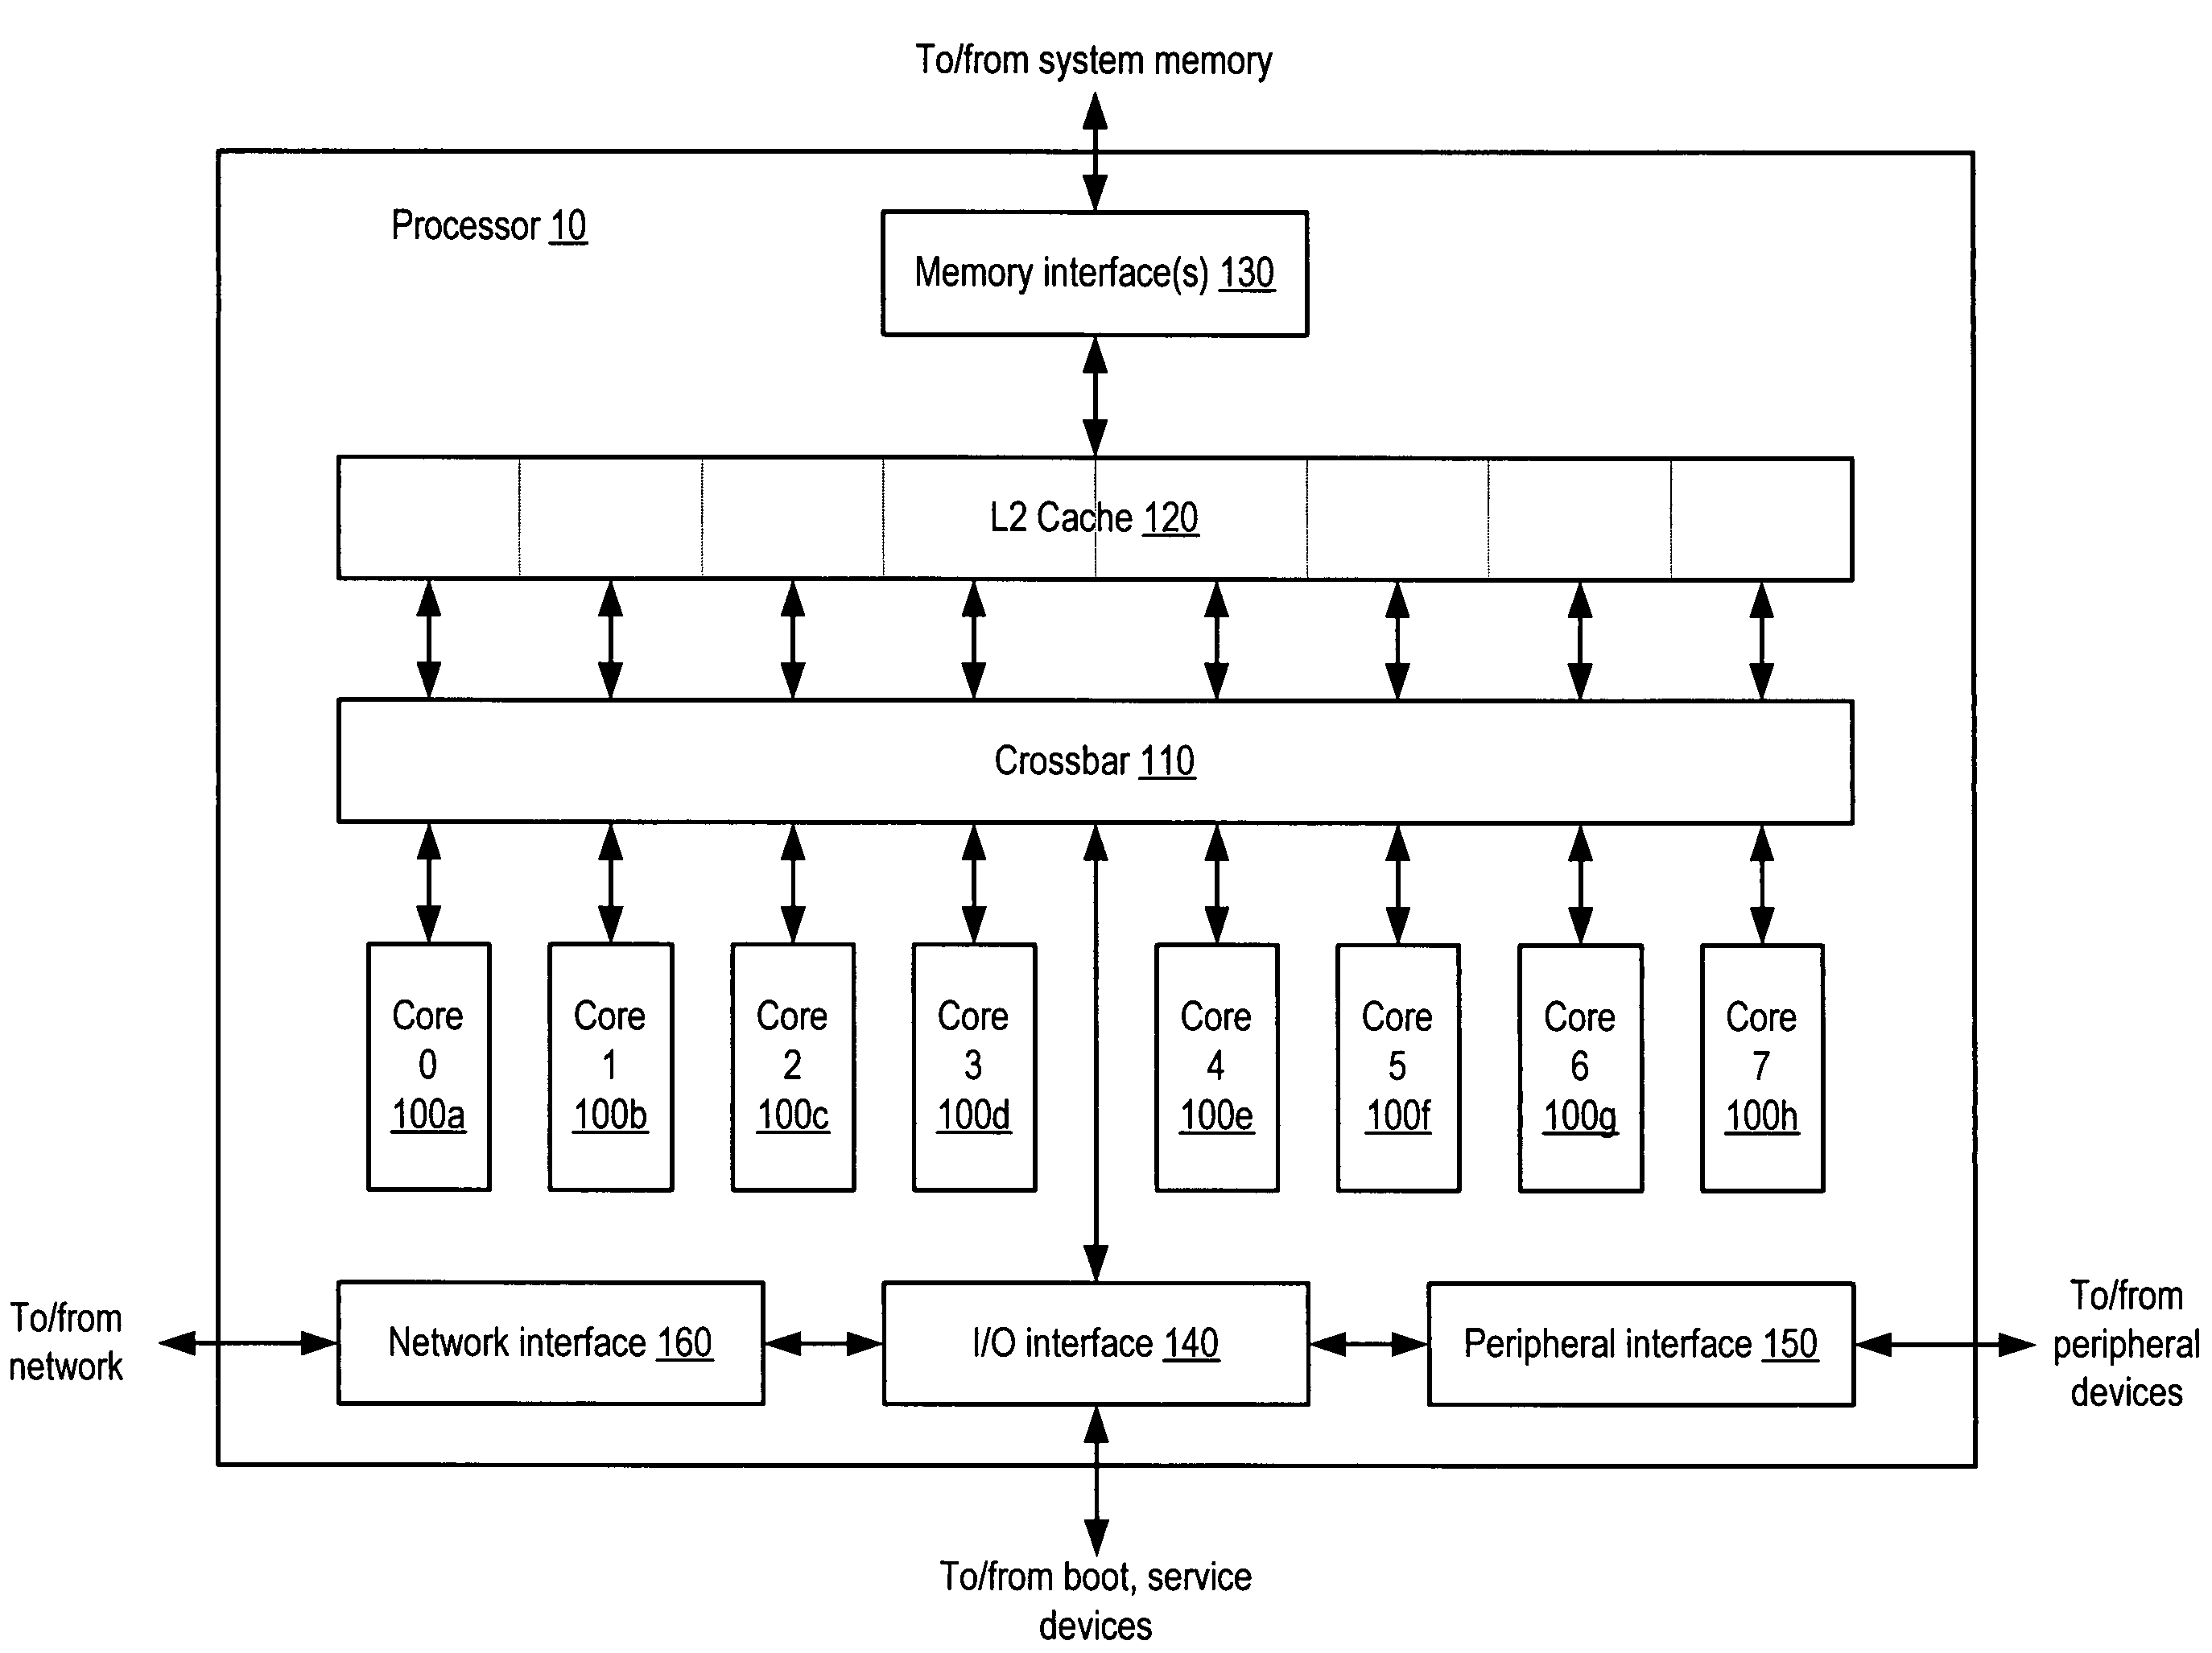 Multiple-core processor with flexible mapping of processor cores to cache banks